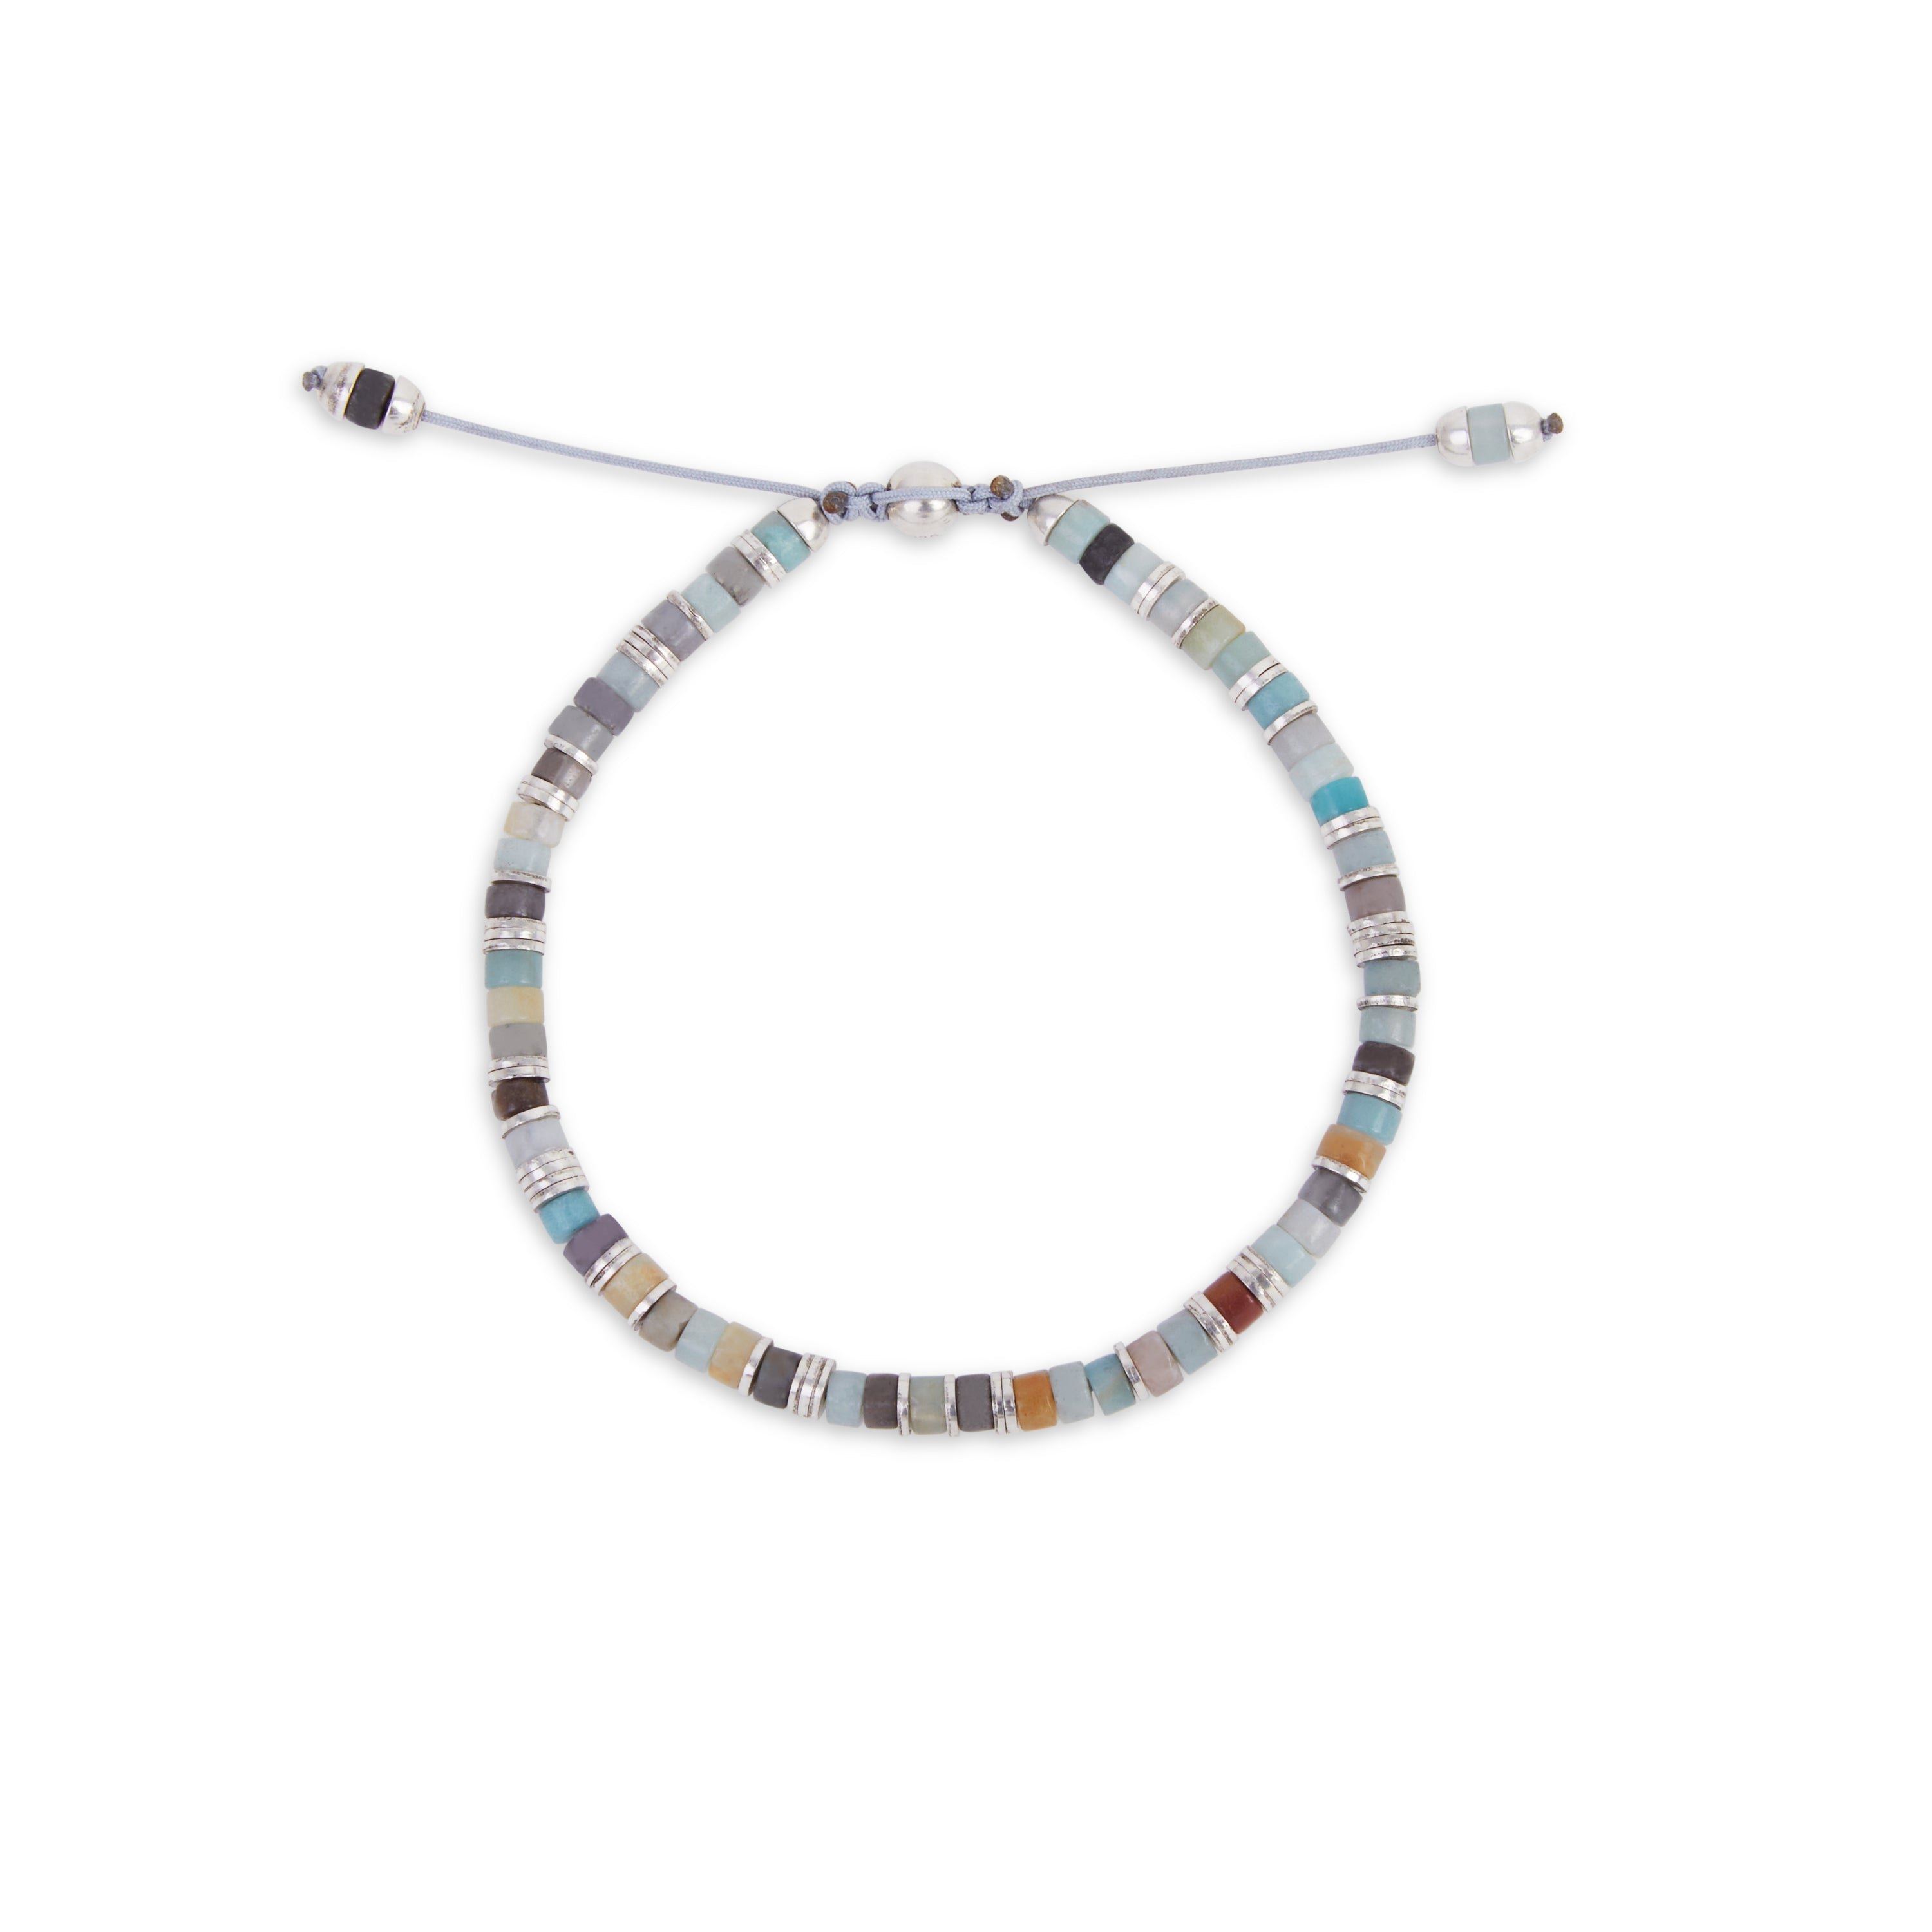 Maor M.Cohen collection Tucson bracelet sterling silver and amazonite